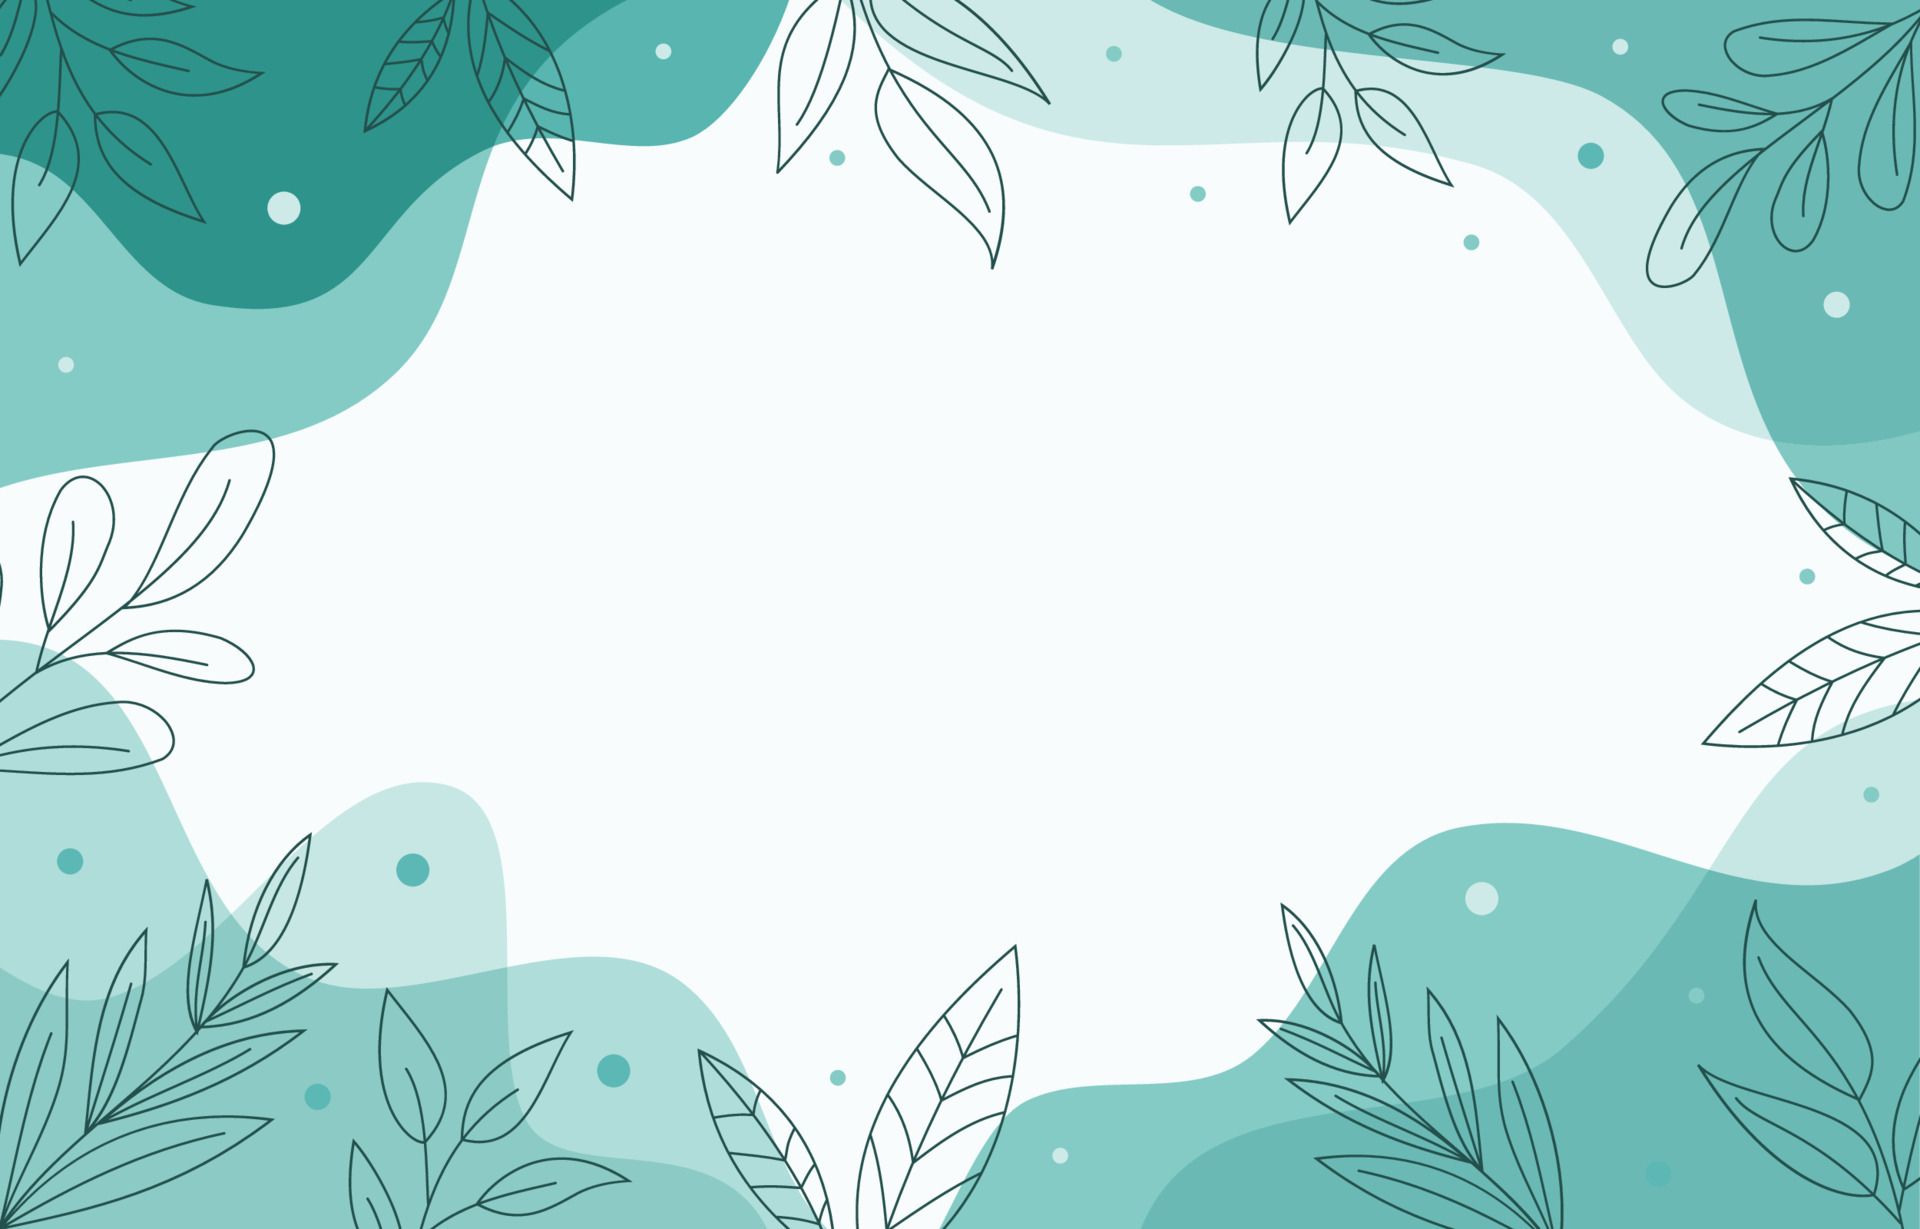 A green and blue background with leaves - Mint green, light green